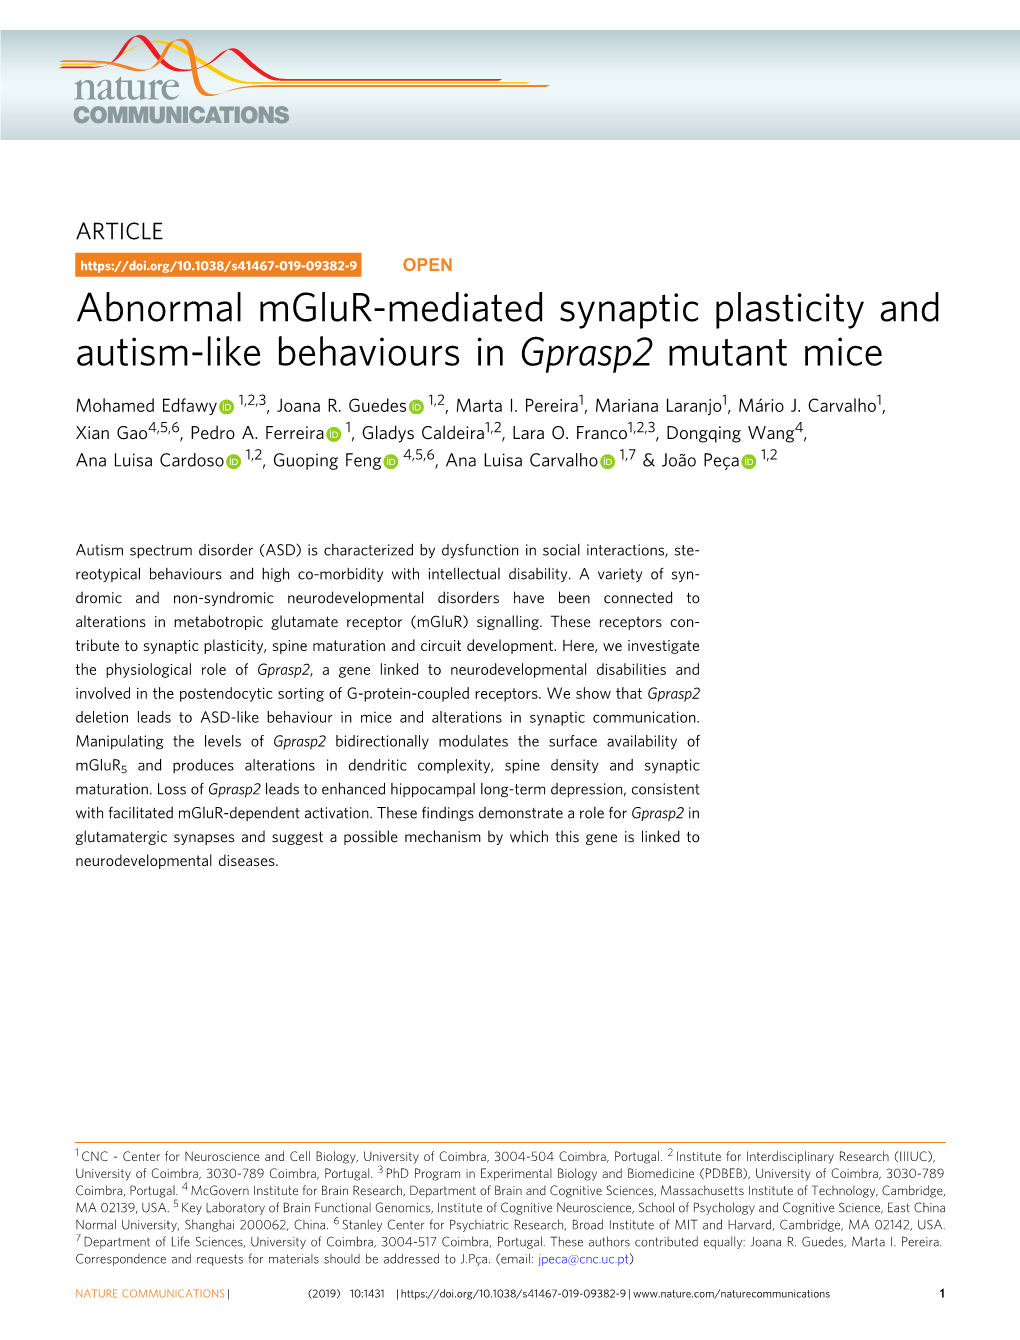 Abnormal Mglur-Mediated Synaptic Plasticity and Autism-Like Behaviours in Gprasp2 Mutant Mice